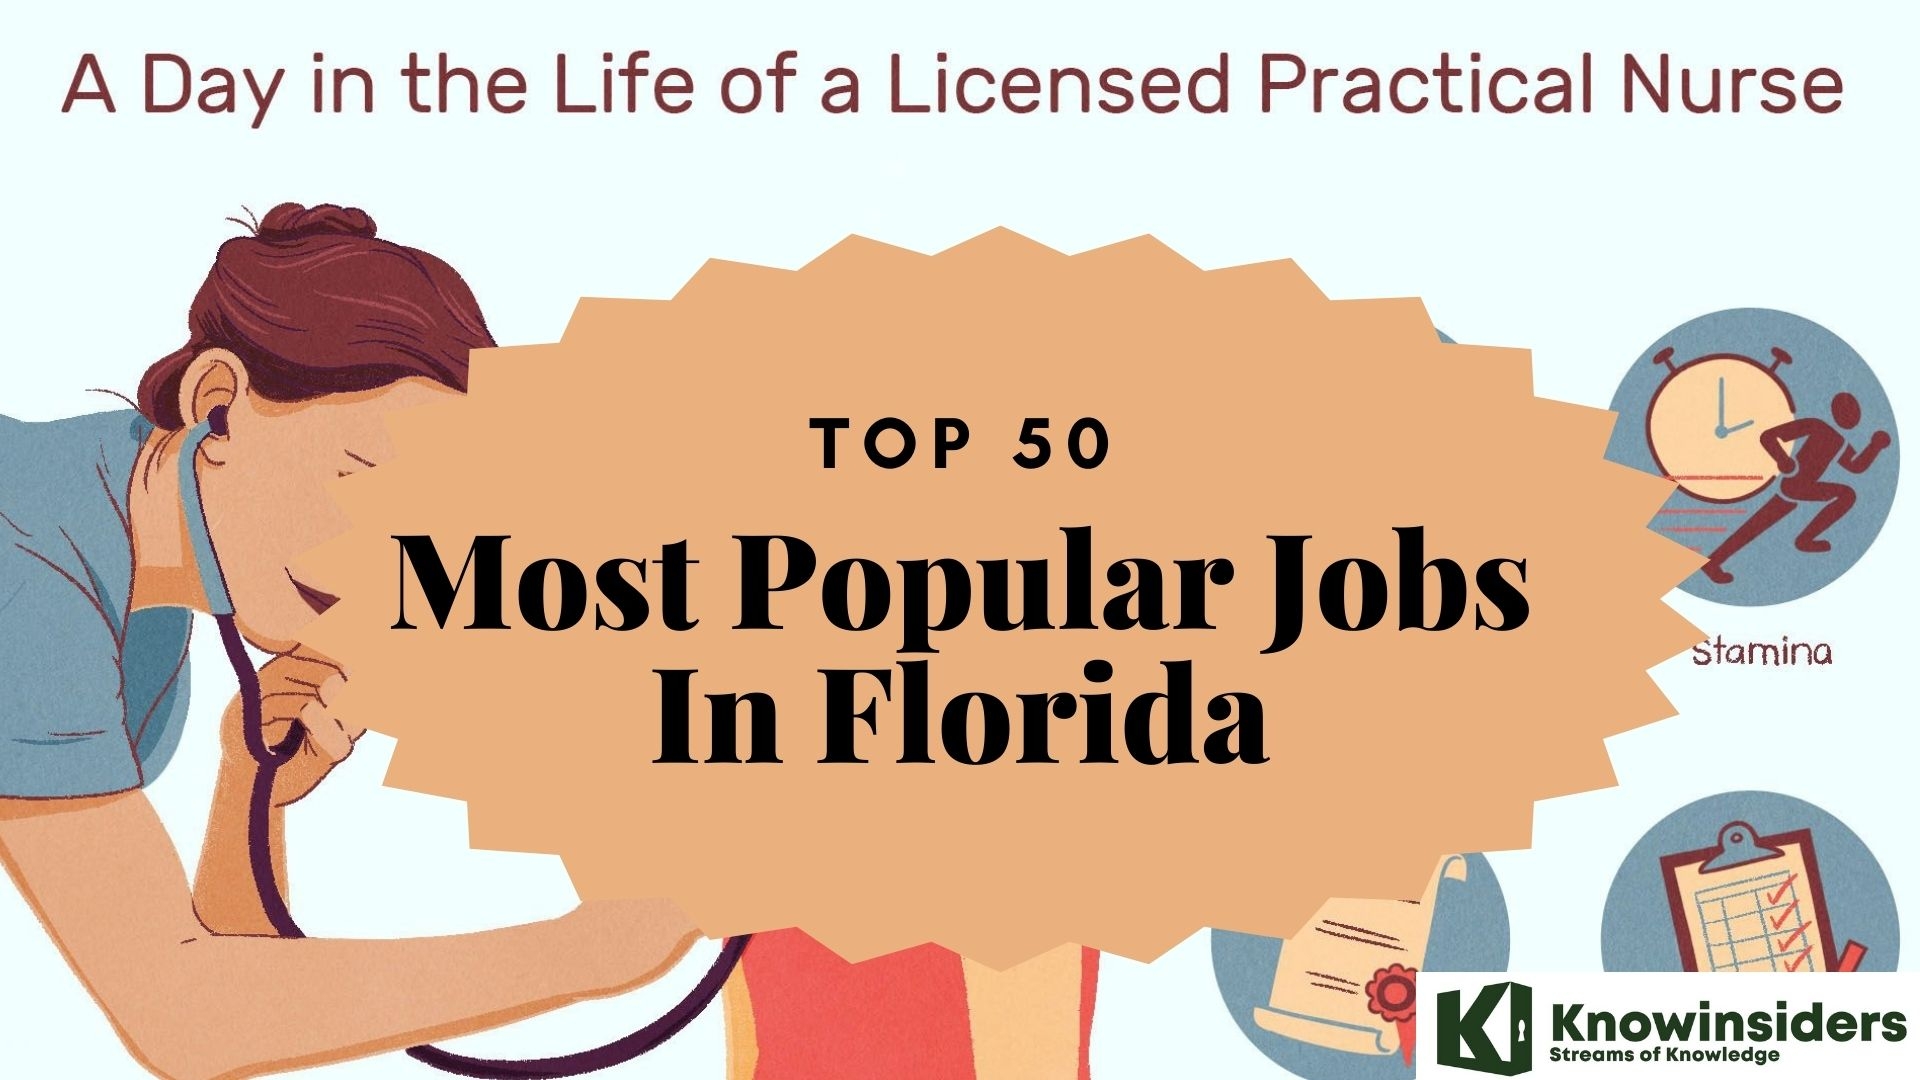 How To Find A Job: Top 50 Most Popular Jobs In Florida